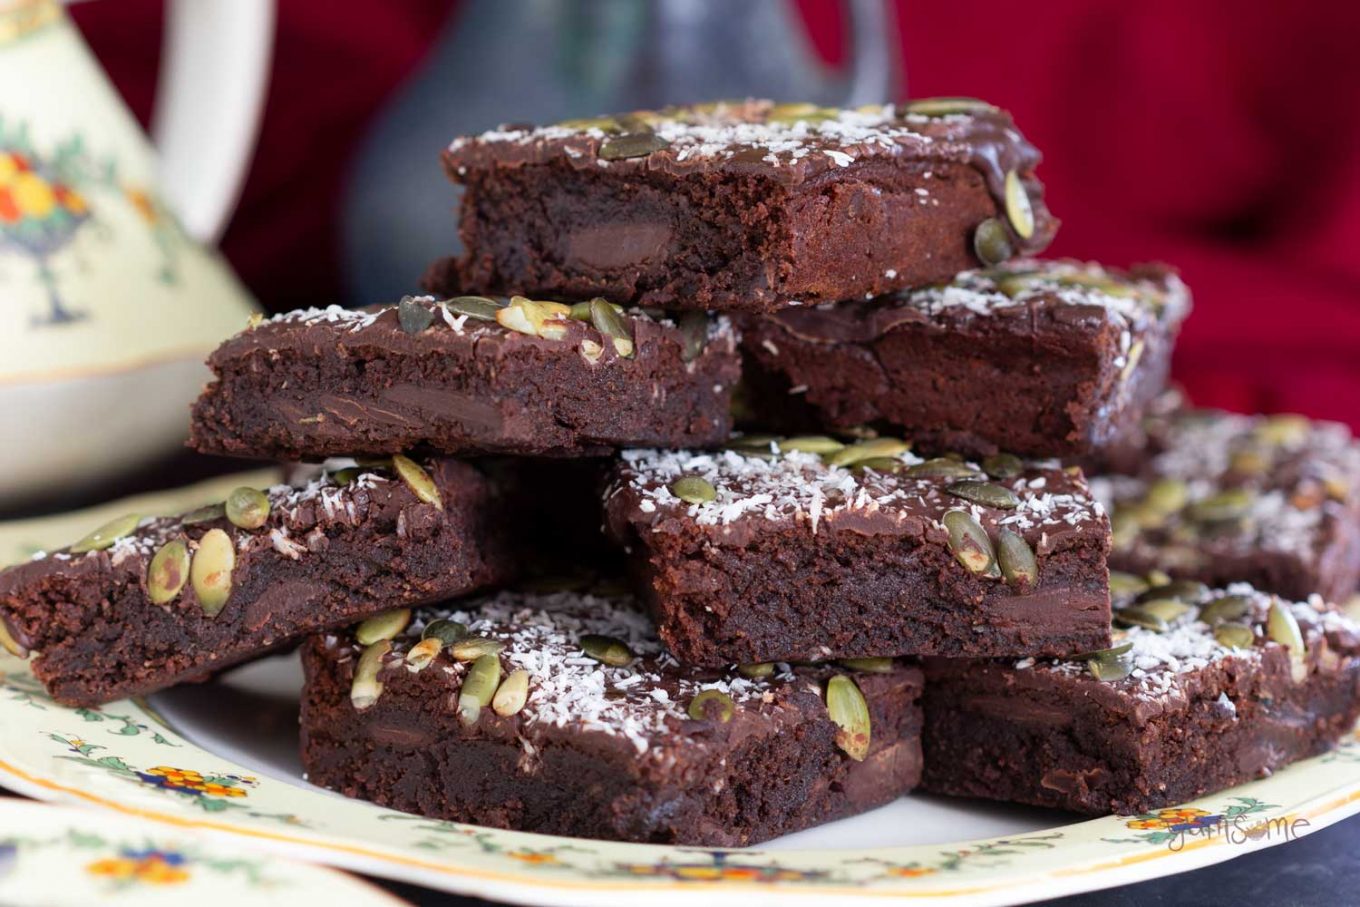 A large plate of brownies.